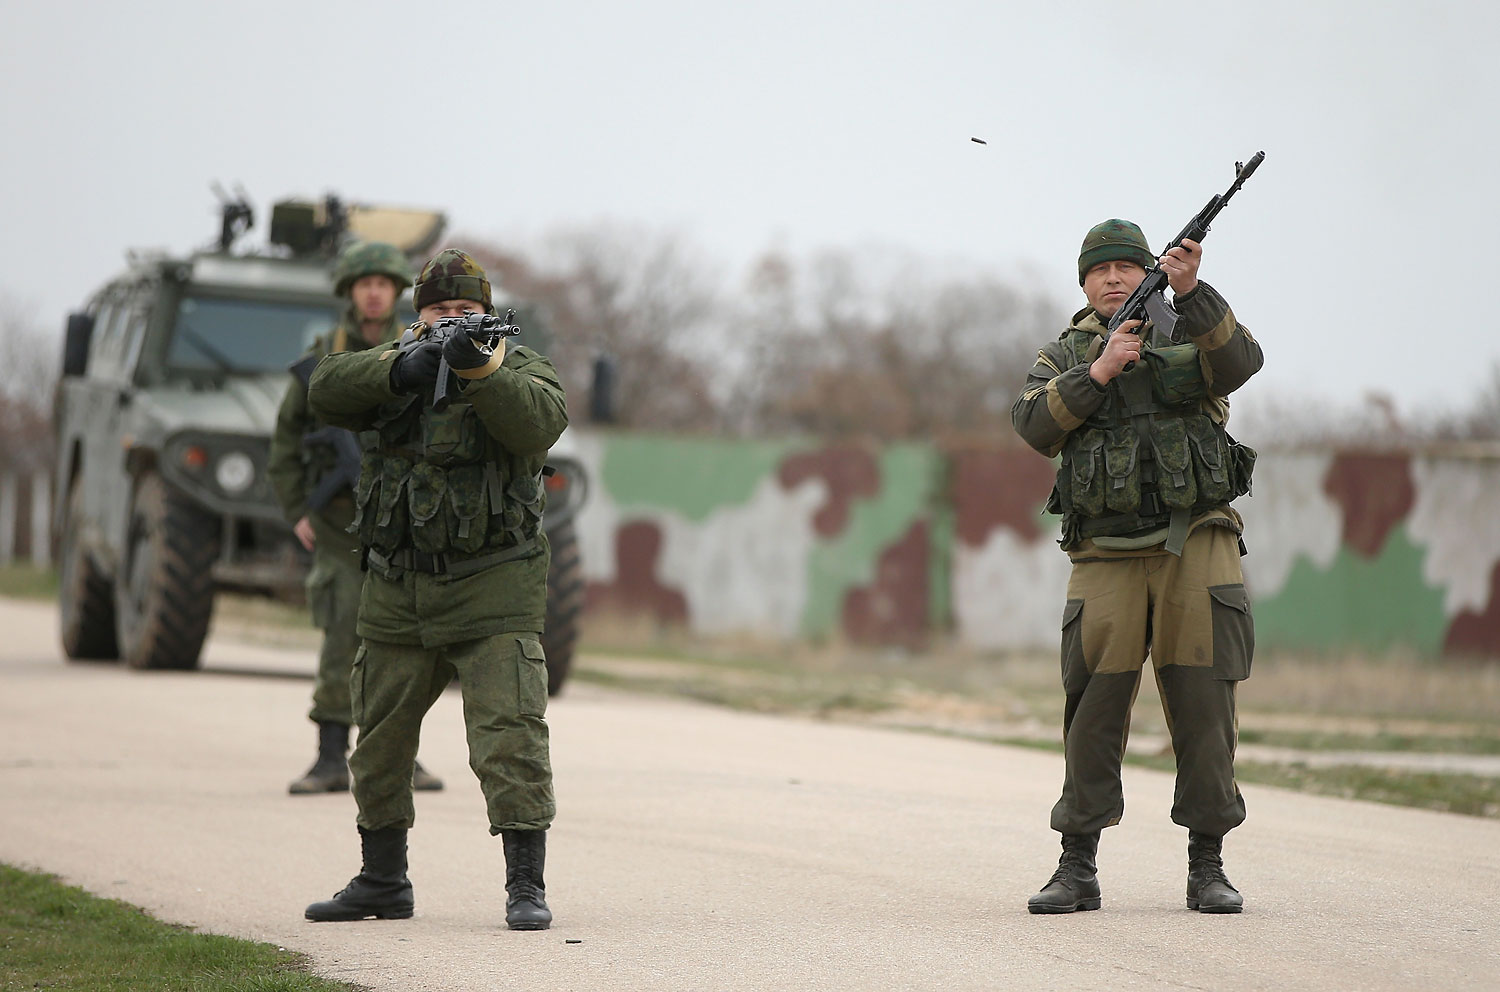 Troops under Russian command fire weapons into the air and scream orders to turn back at an approaching group of over 100 hundred unarmed Ukrainian troops at the Belbek airbase, which the Russian troops are occcupying, in Lubimovka, Crimea on March 4, 2014. (Sean Gallup—Getty Images)